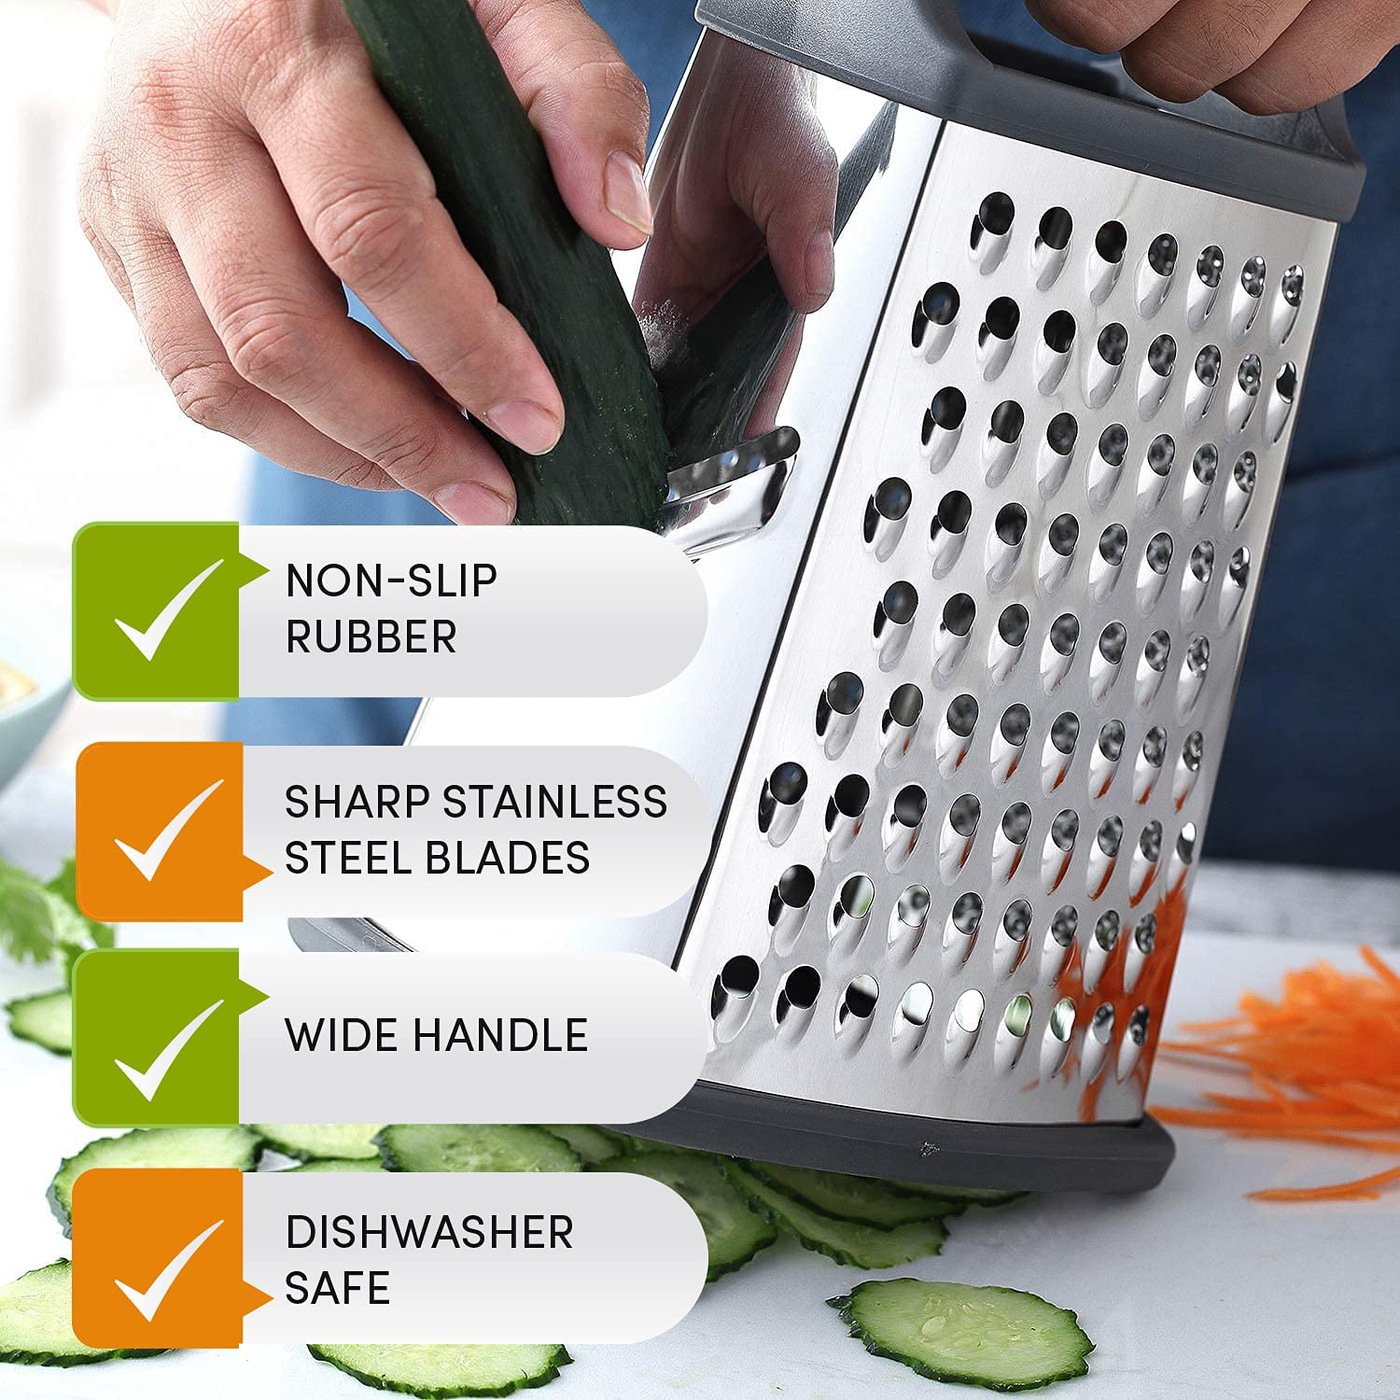 Spring Chef Professional Box Grater, Stainless Steel with 4 Sides, Best for Parmesan Cheese, Vegetables, Ginger, XL Size, Red